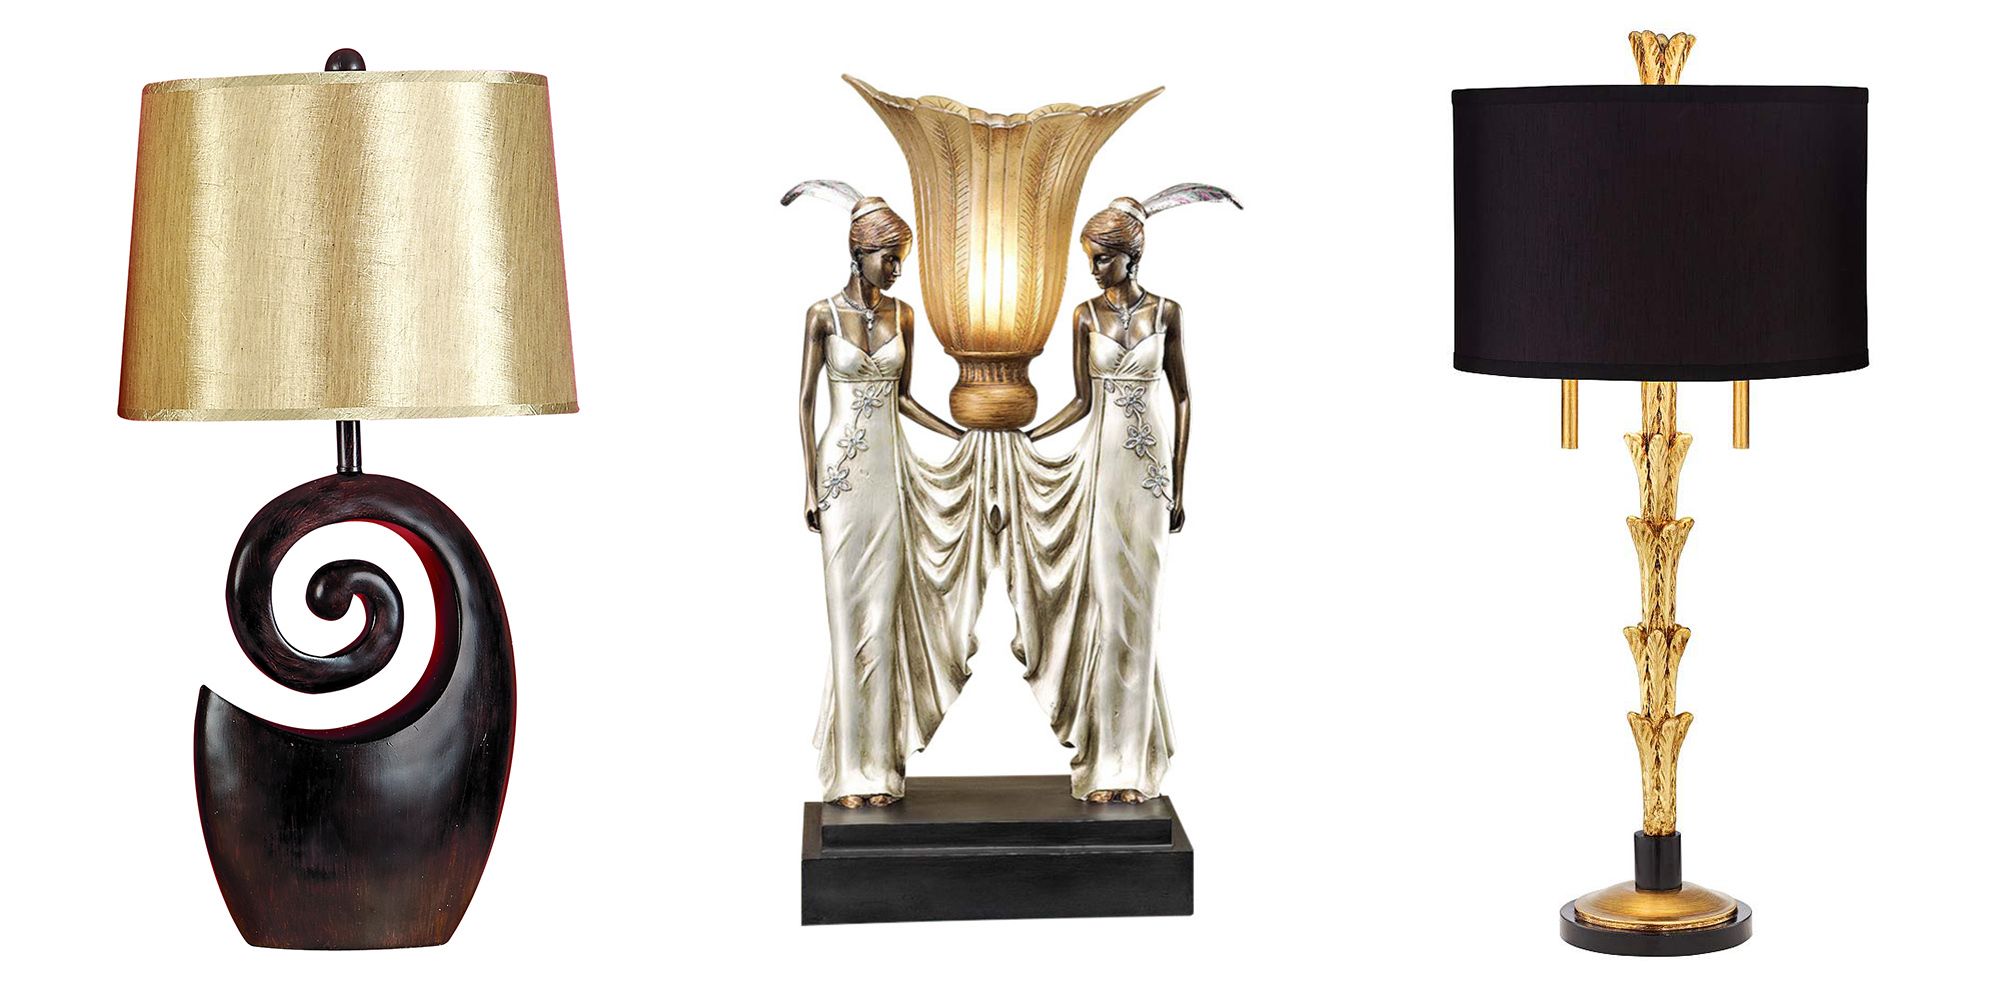 Richly Decorated Art Deco Style Lamp With Gold Look, Polished